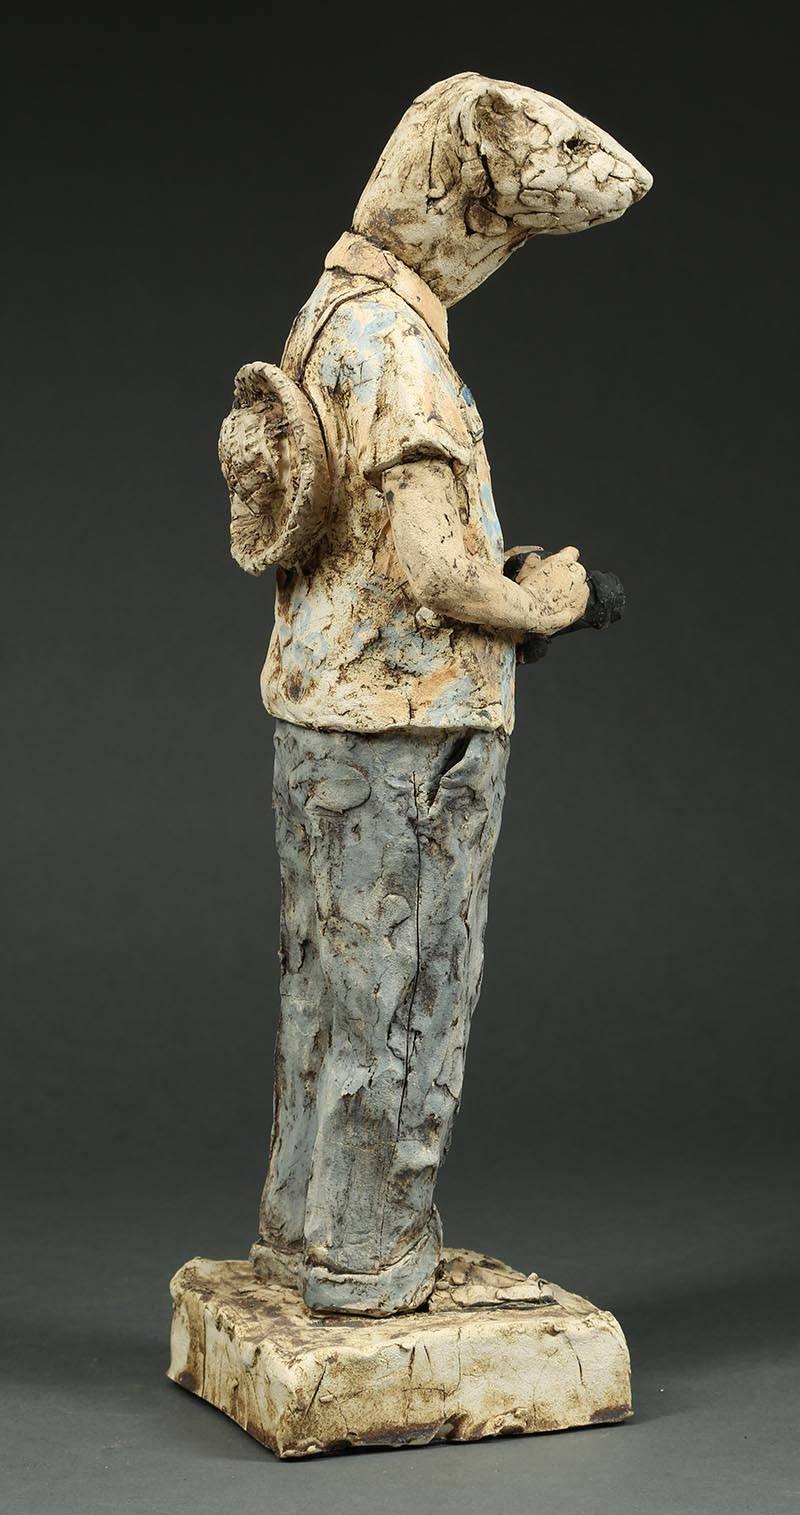 Hand-Crafted Contemporary Solid Ceramic Standing Figure 